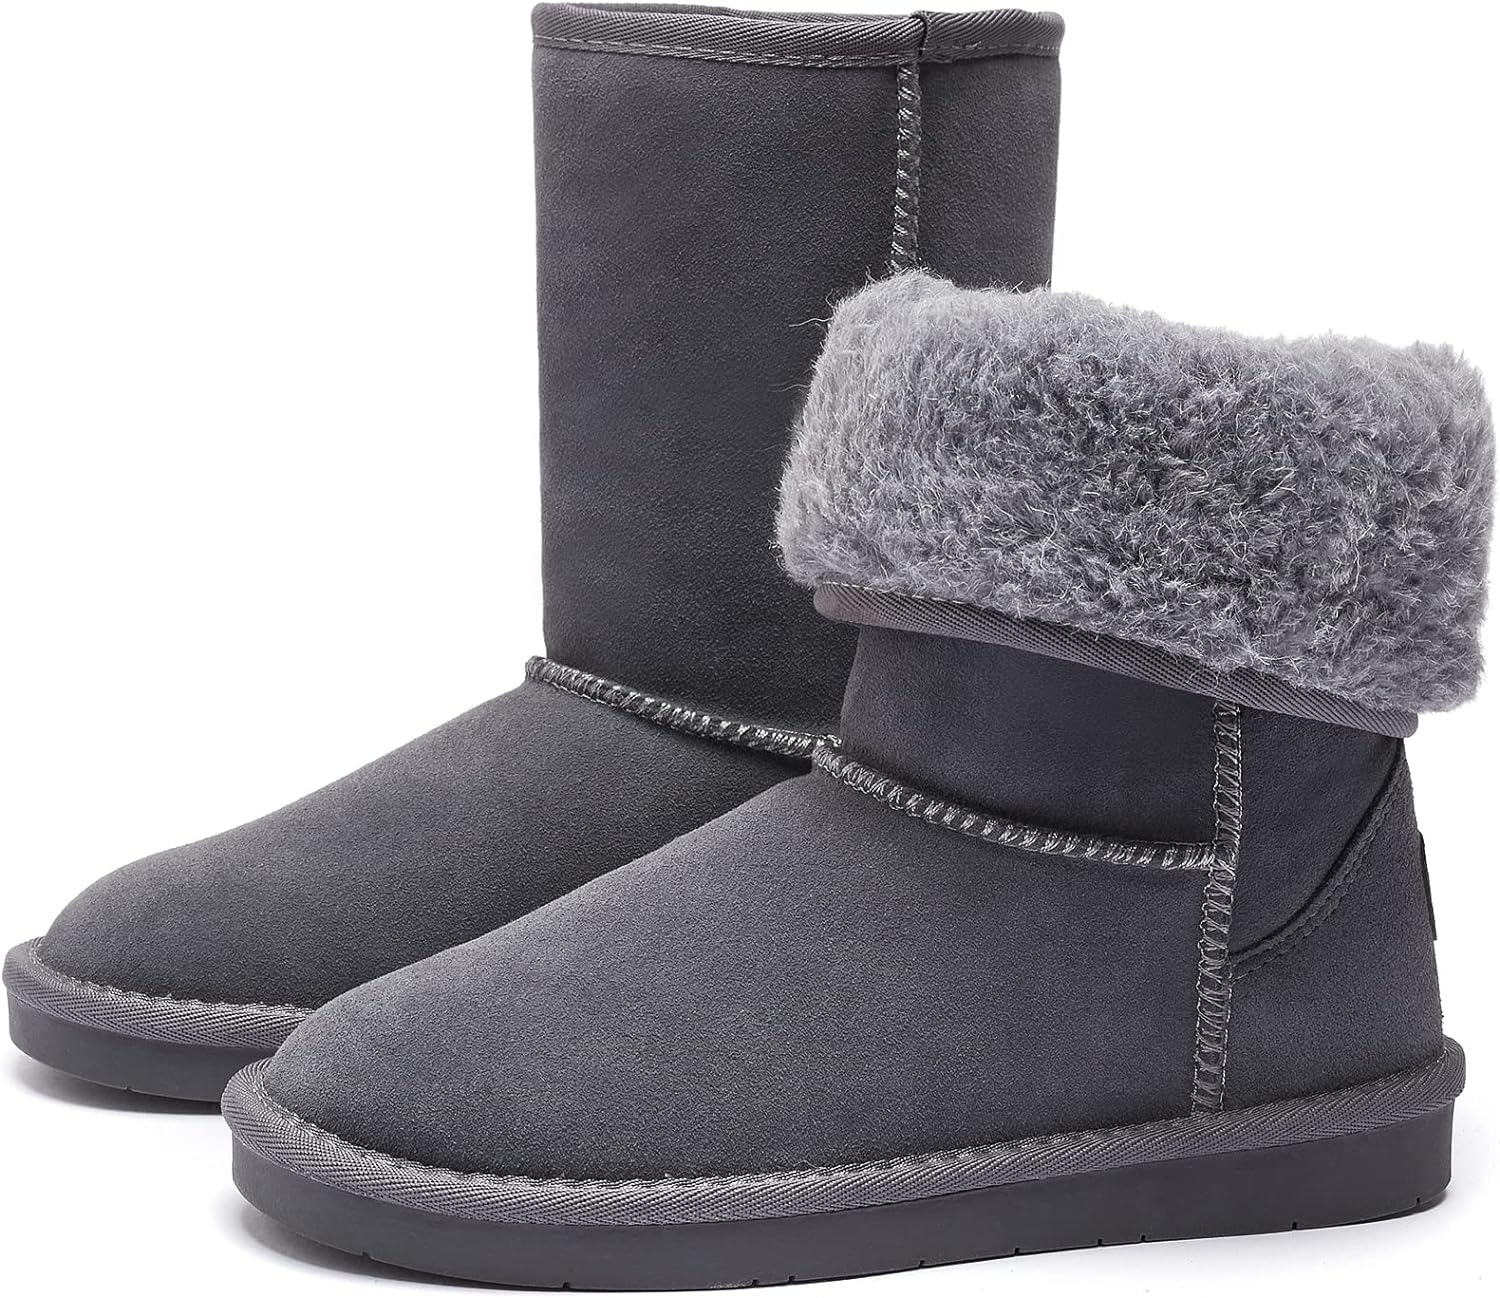 Absolutely love the quality and look of these boots if you don't need the word UGG or the pricetag. They are warm and sturdy for winter. My only issue is I wear a 6.5 and ordered the 7. They are too big so I had to order the 6. Even with thick socks, 7 was too big. It may be that my feet are closer to a 6 than a 7, being a half size. Update: The 6 was absolutely different. With the 7 being so big, I thought it would be perfect. Nope. Way too small. And oddly not just length but shaft. I have nar